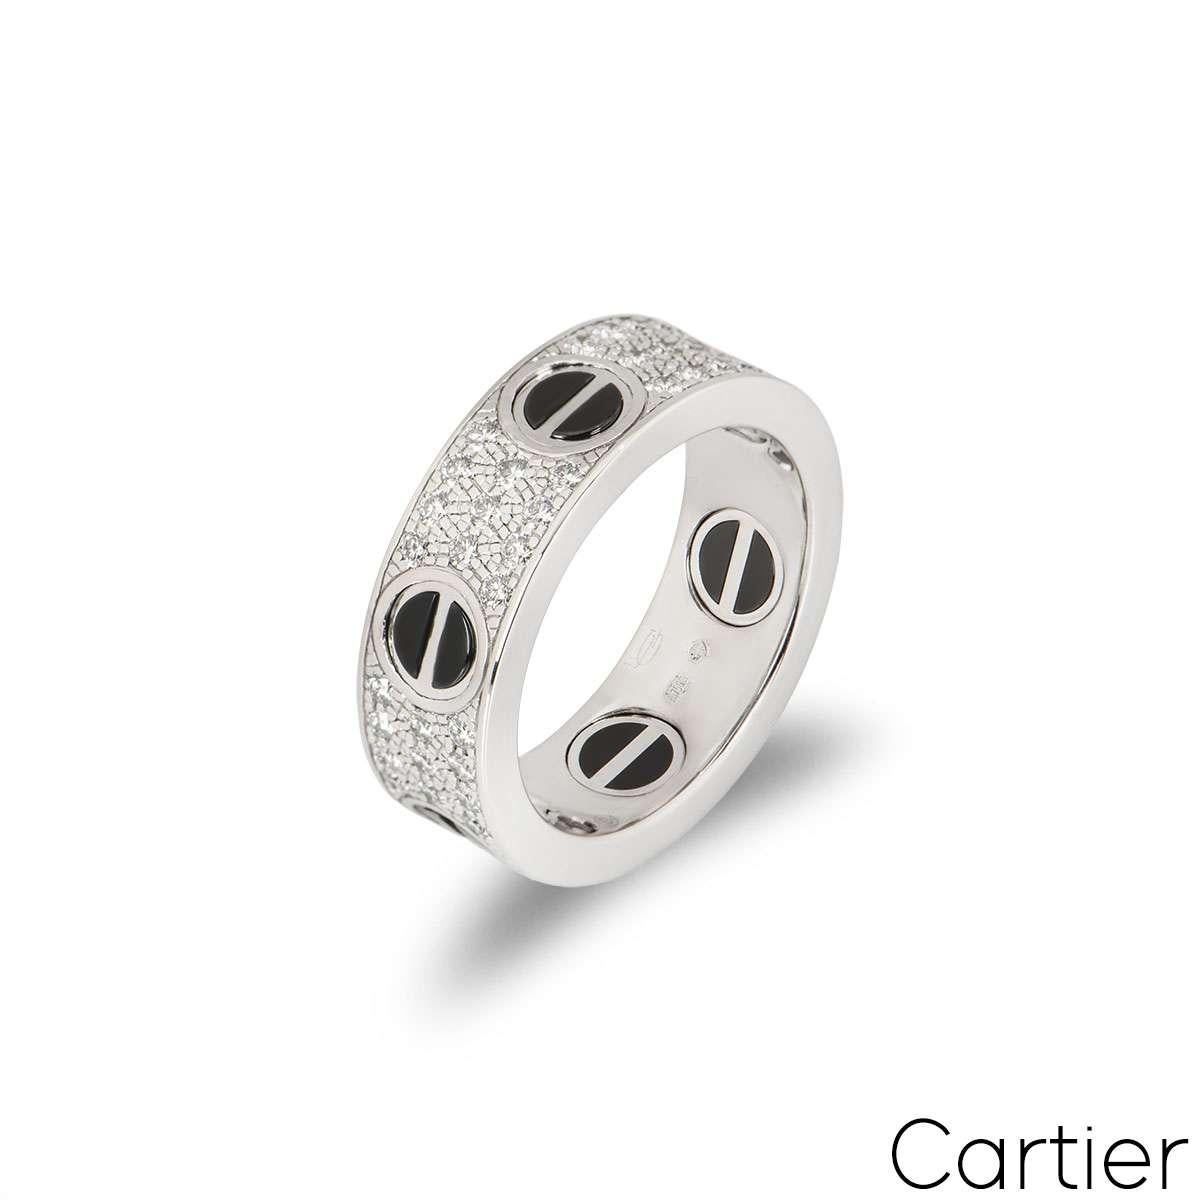 An 18k white gold diamond set Love ring by Cartier. The ring features the classic screws featuring a ceramic inlay and has 66 pave set, round brilliant cut diamonds set between each screw, totalling 0.74ct. The 6.5mm wide ring is a UK size N/ US